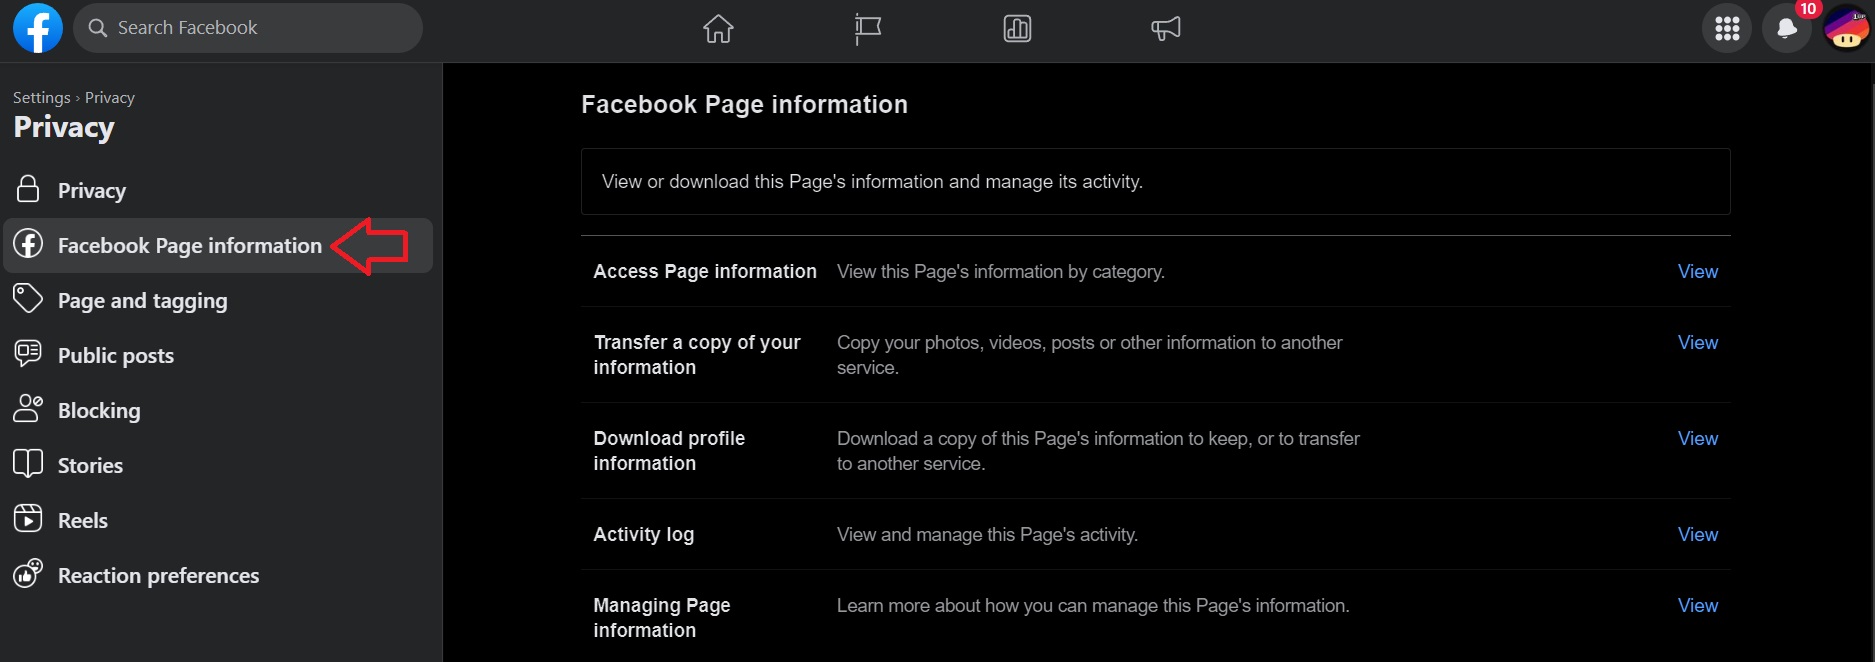 Facebook page information on settings.